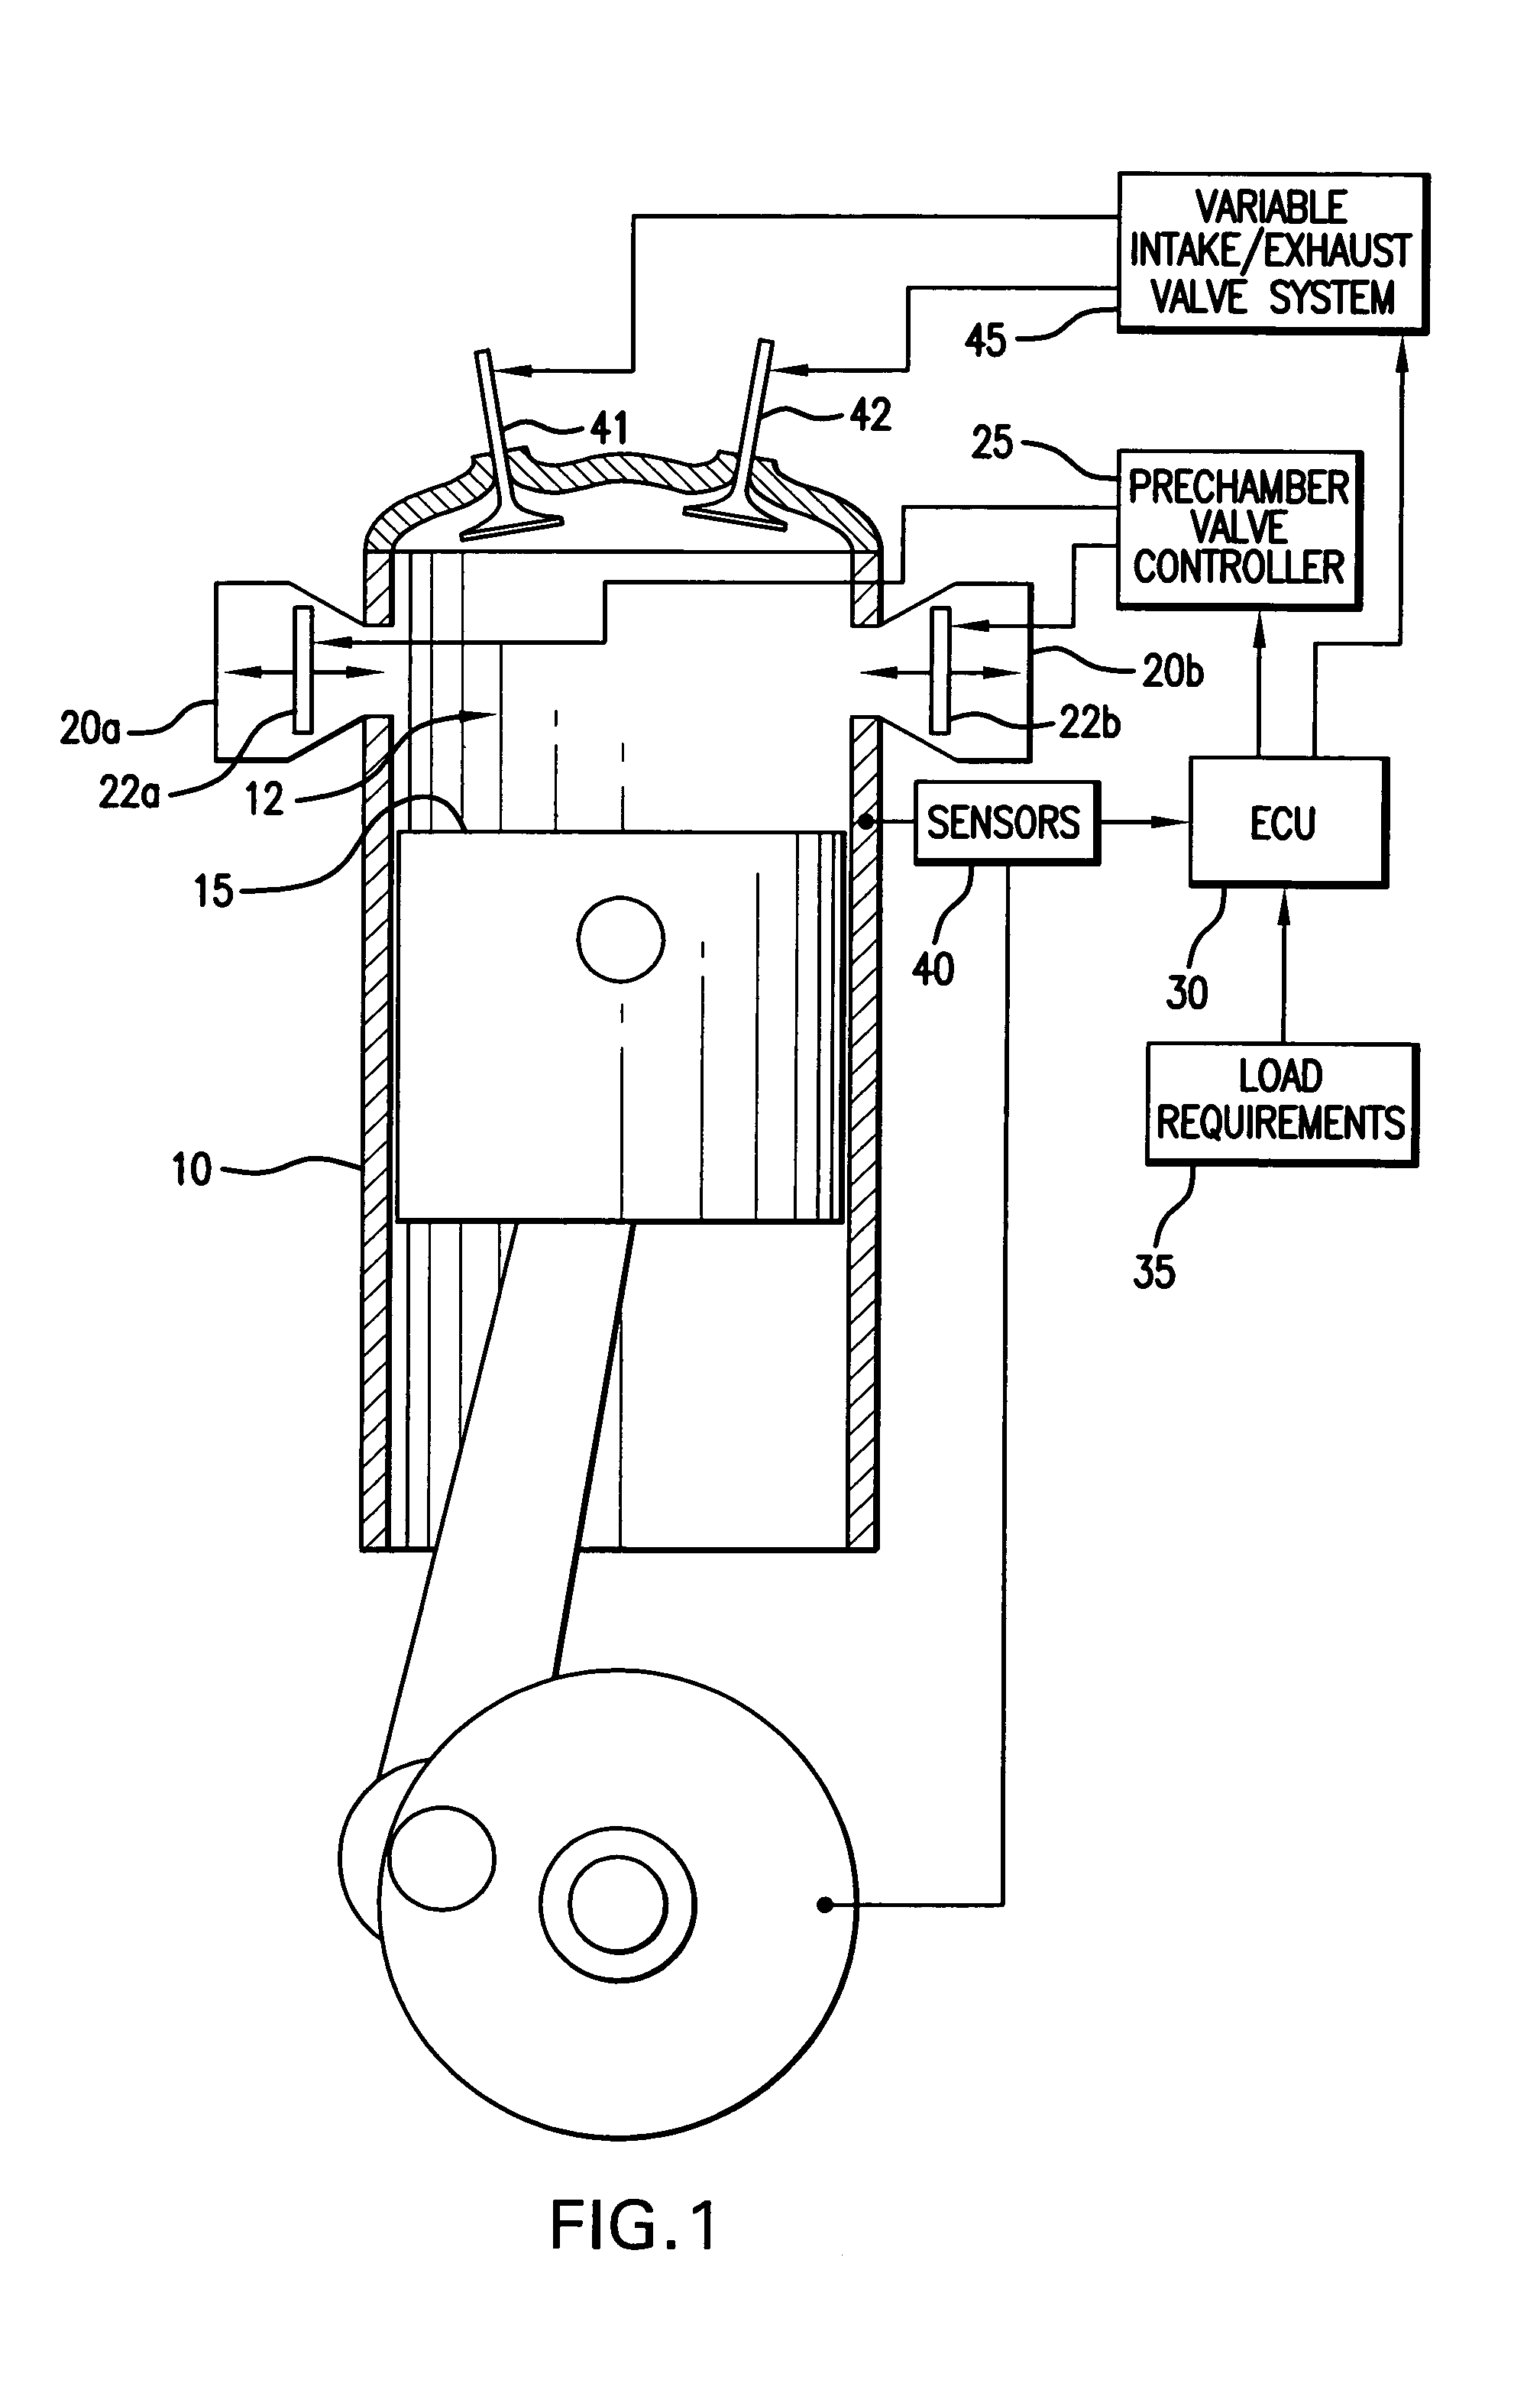 Control of auto-ignition timing for homogeneous combustion jet ignition engines